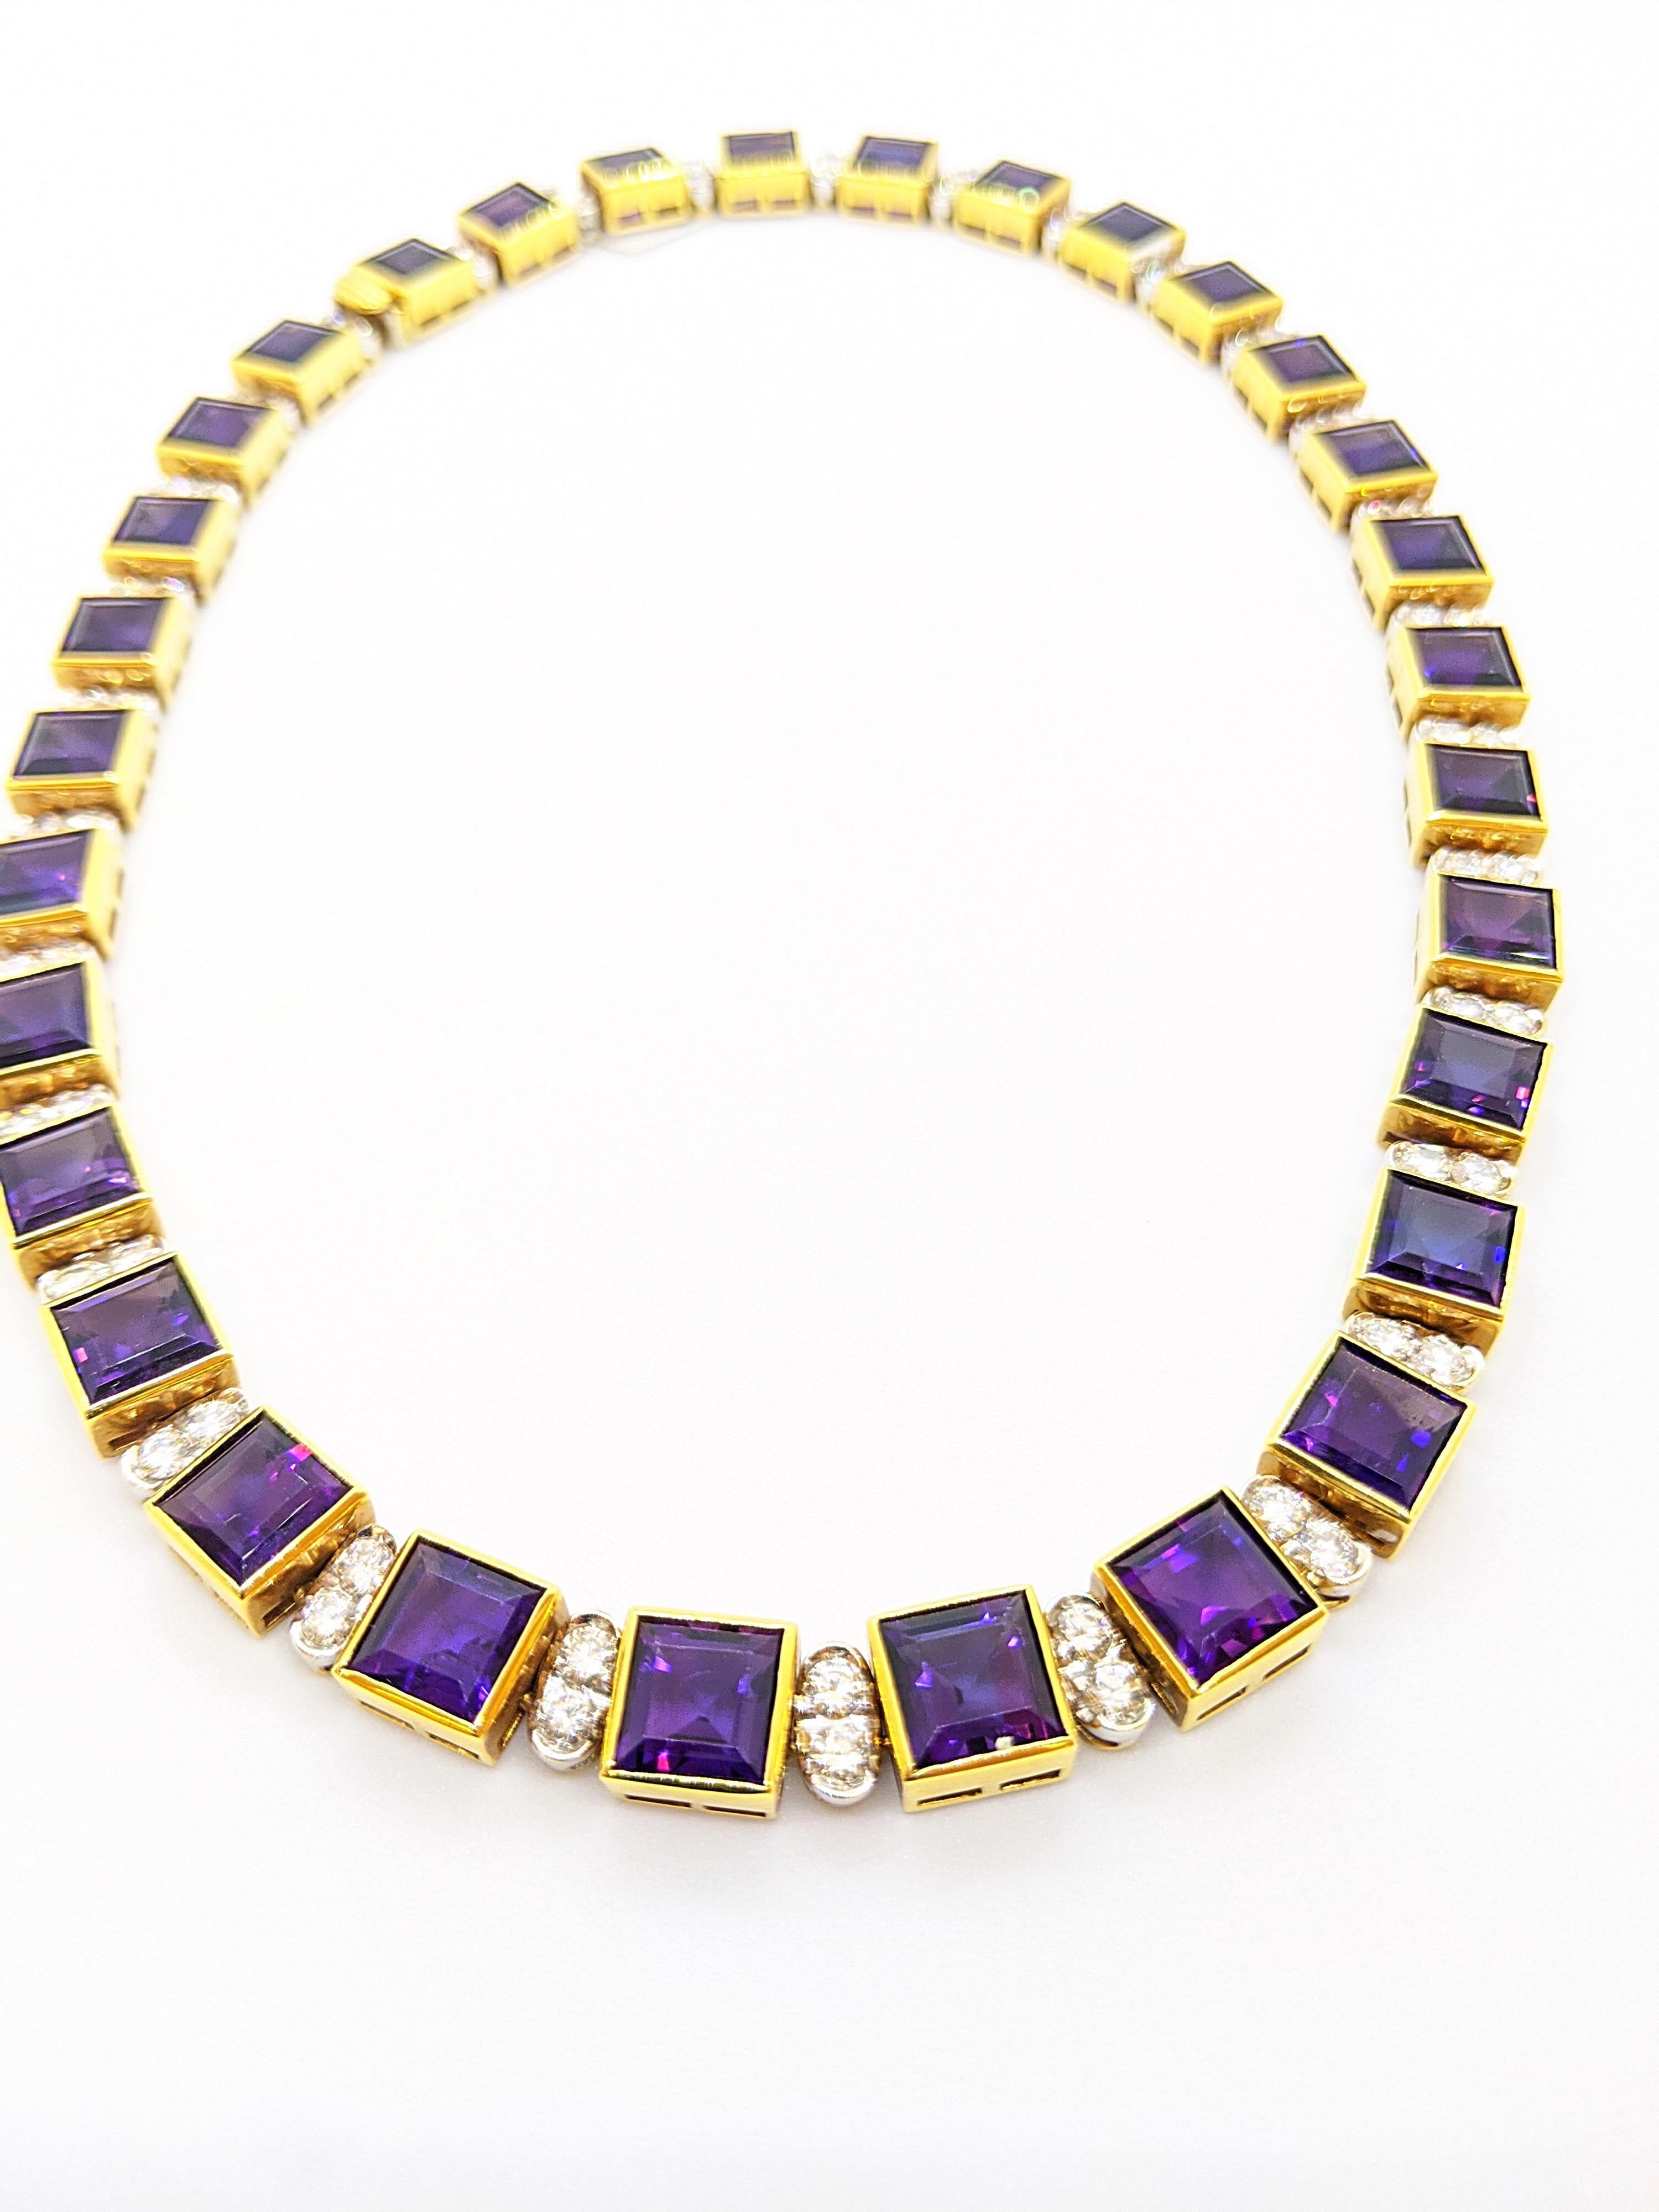 Emerald Cut 18KT Yellow Gold 61.19CT. Amethyst & 5.51Ct. Diamond Art Deco Inspired Necklace For Sale